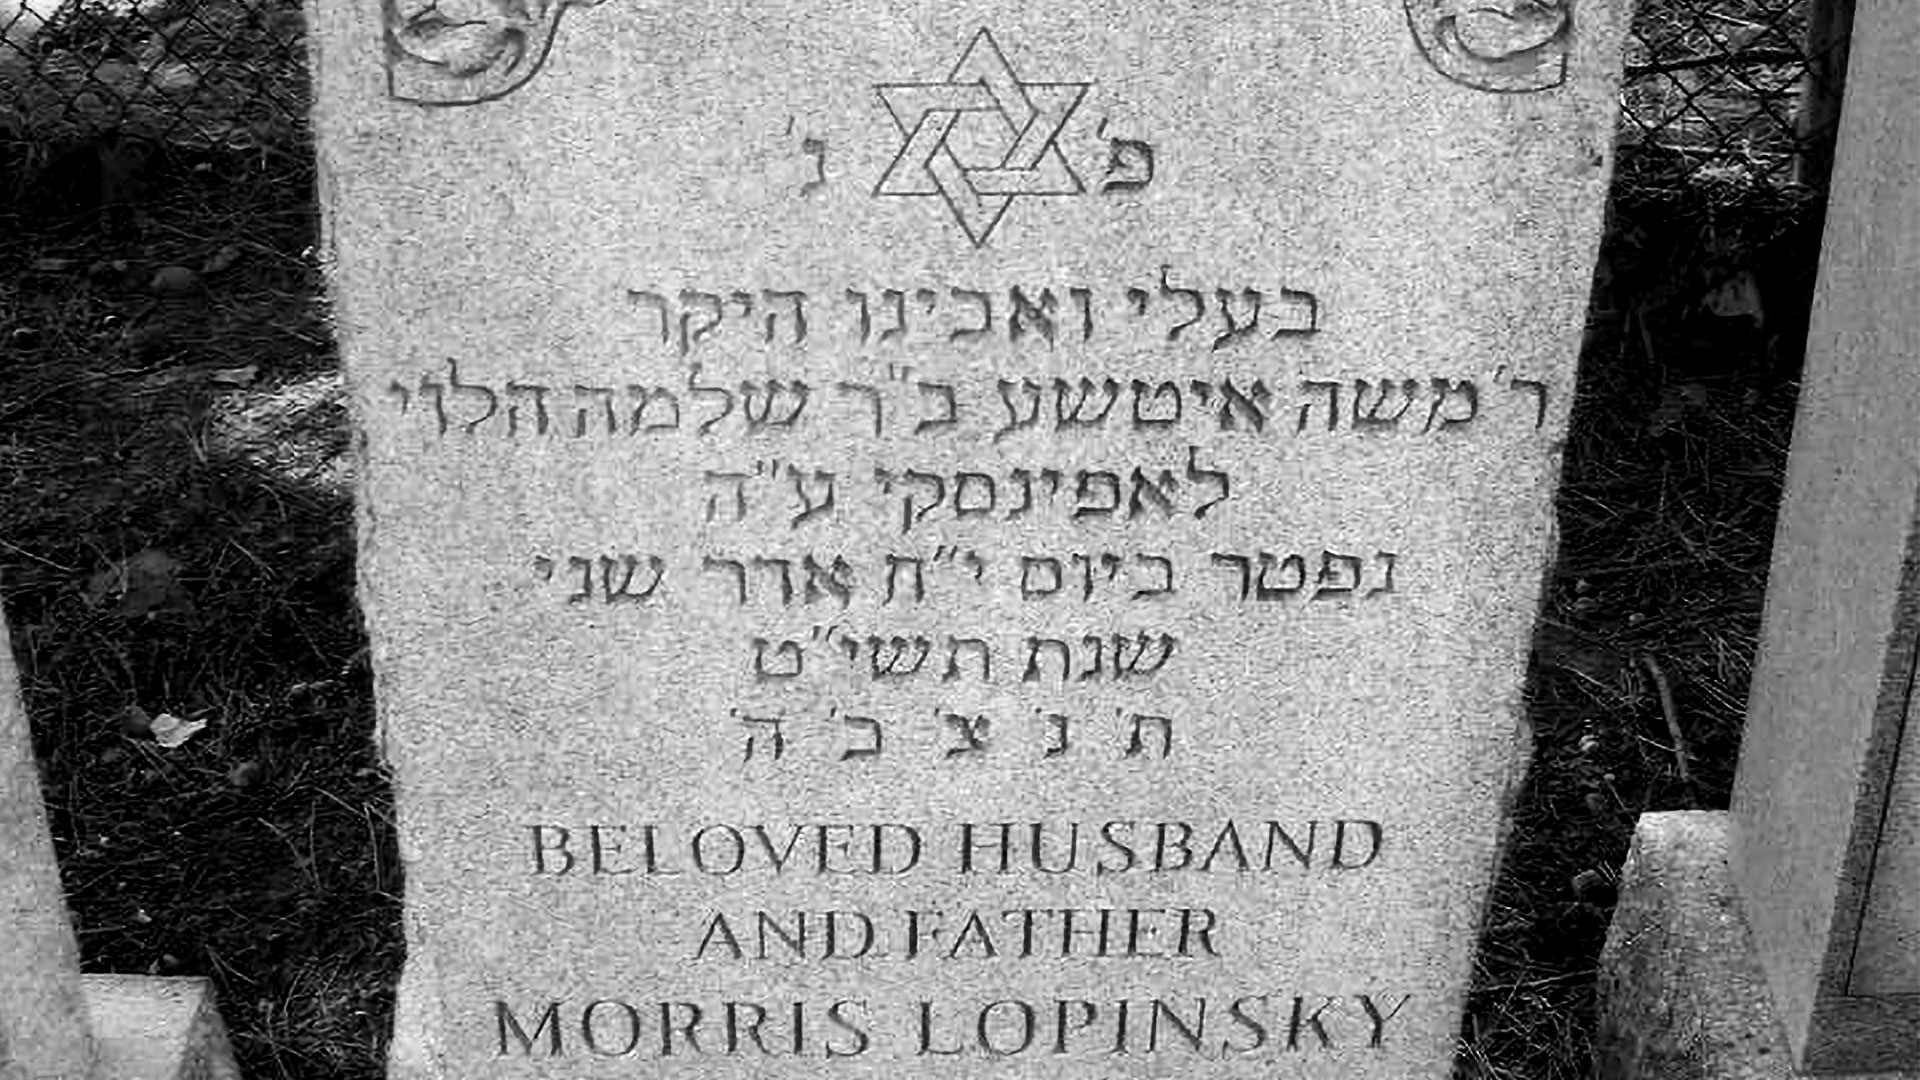 The Complete Visual Guide to Jewish Headstones